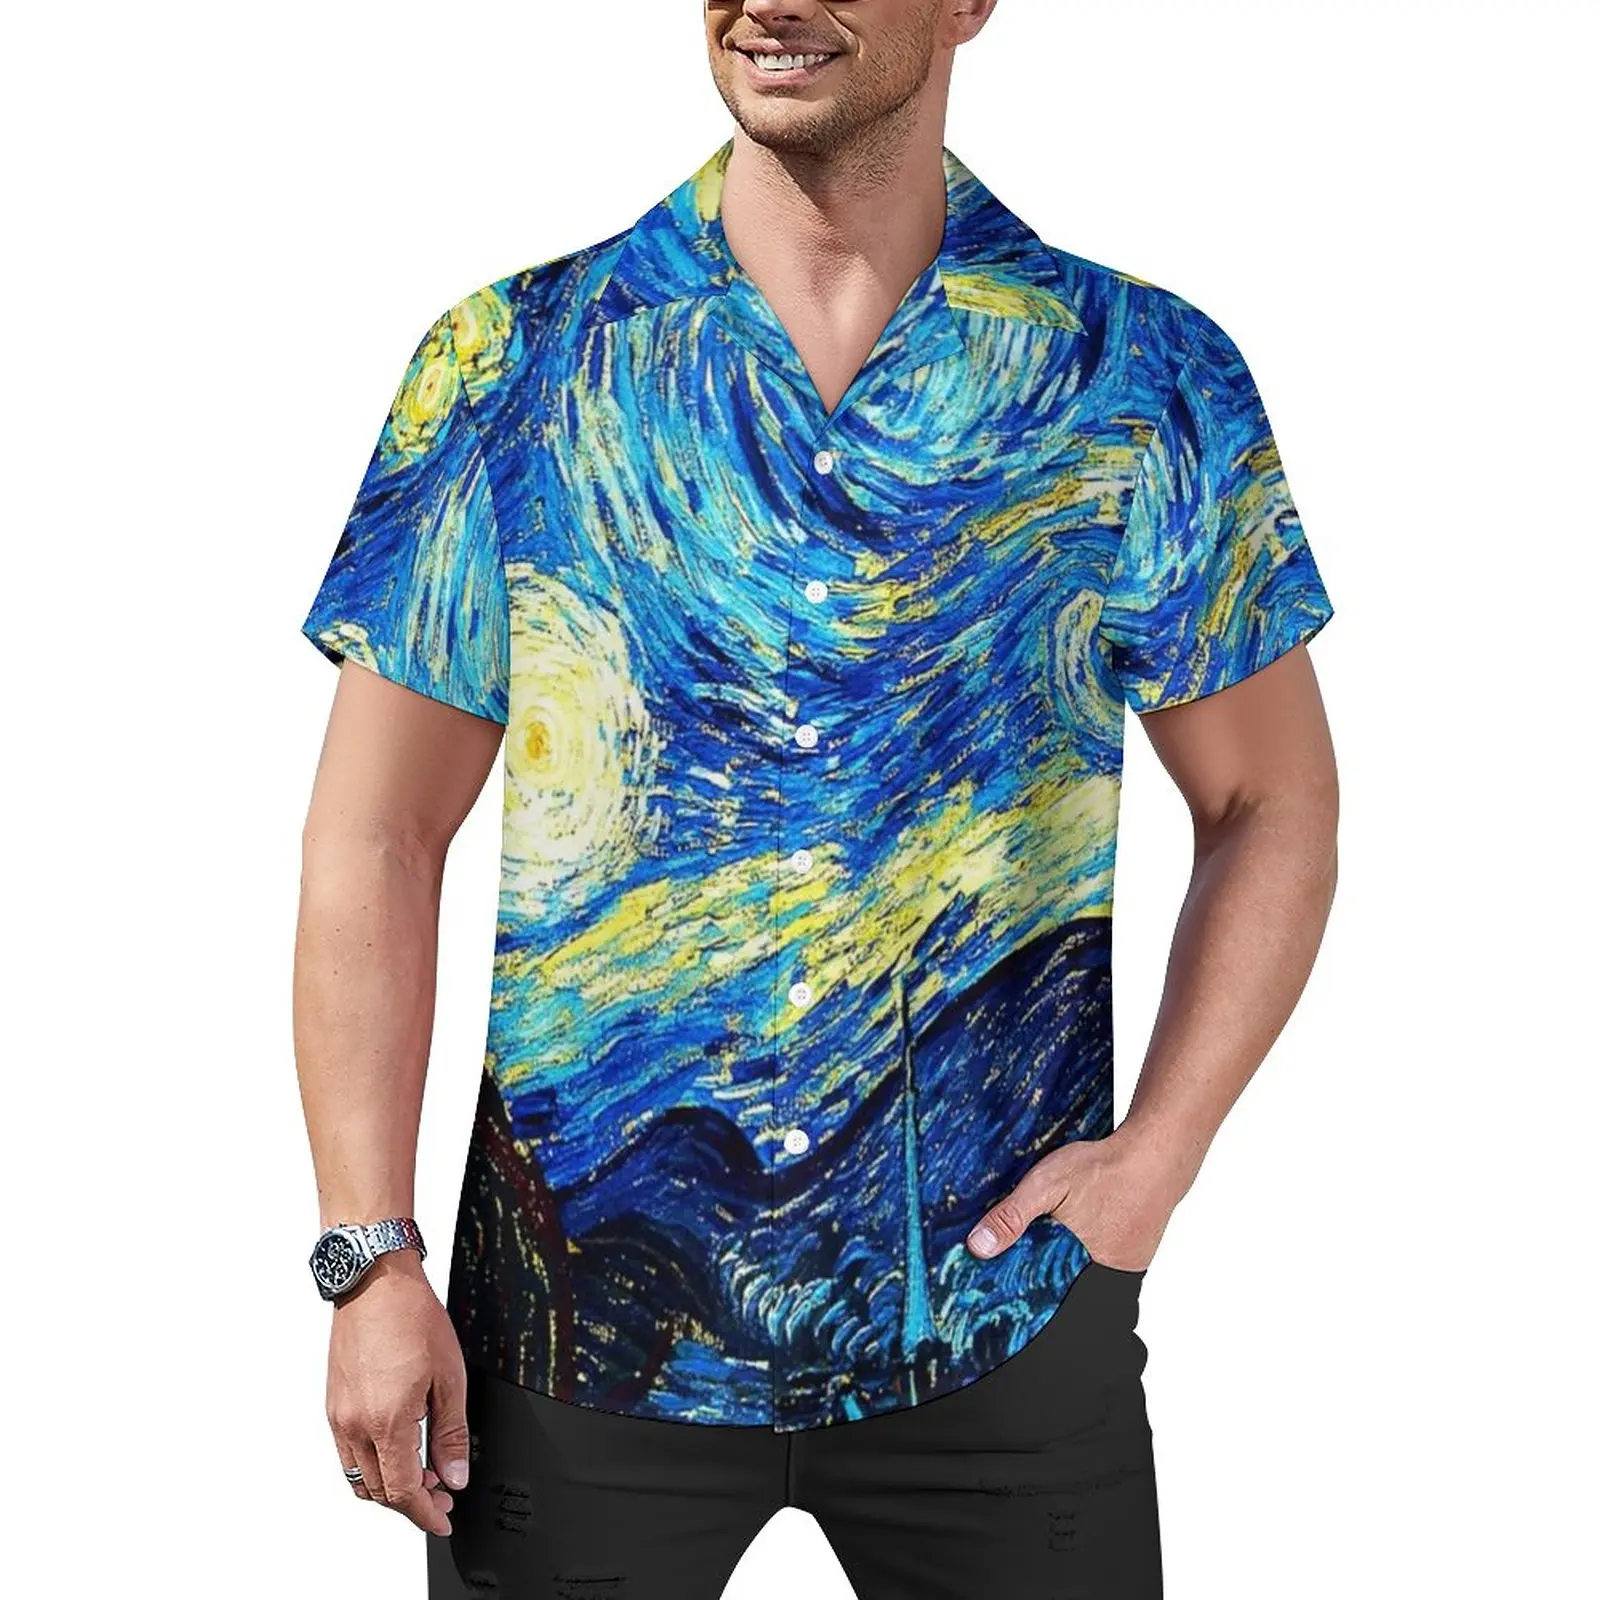 

Starry Night Casual Shirts Vincent Van Gogh Vacation Shirt Summer Streetwear Blouses Male Print Large Size